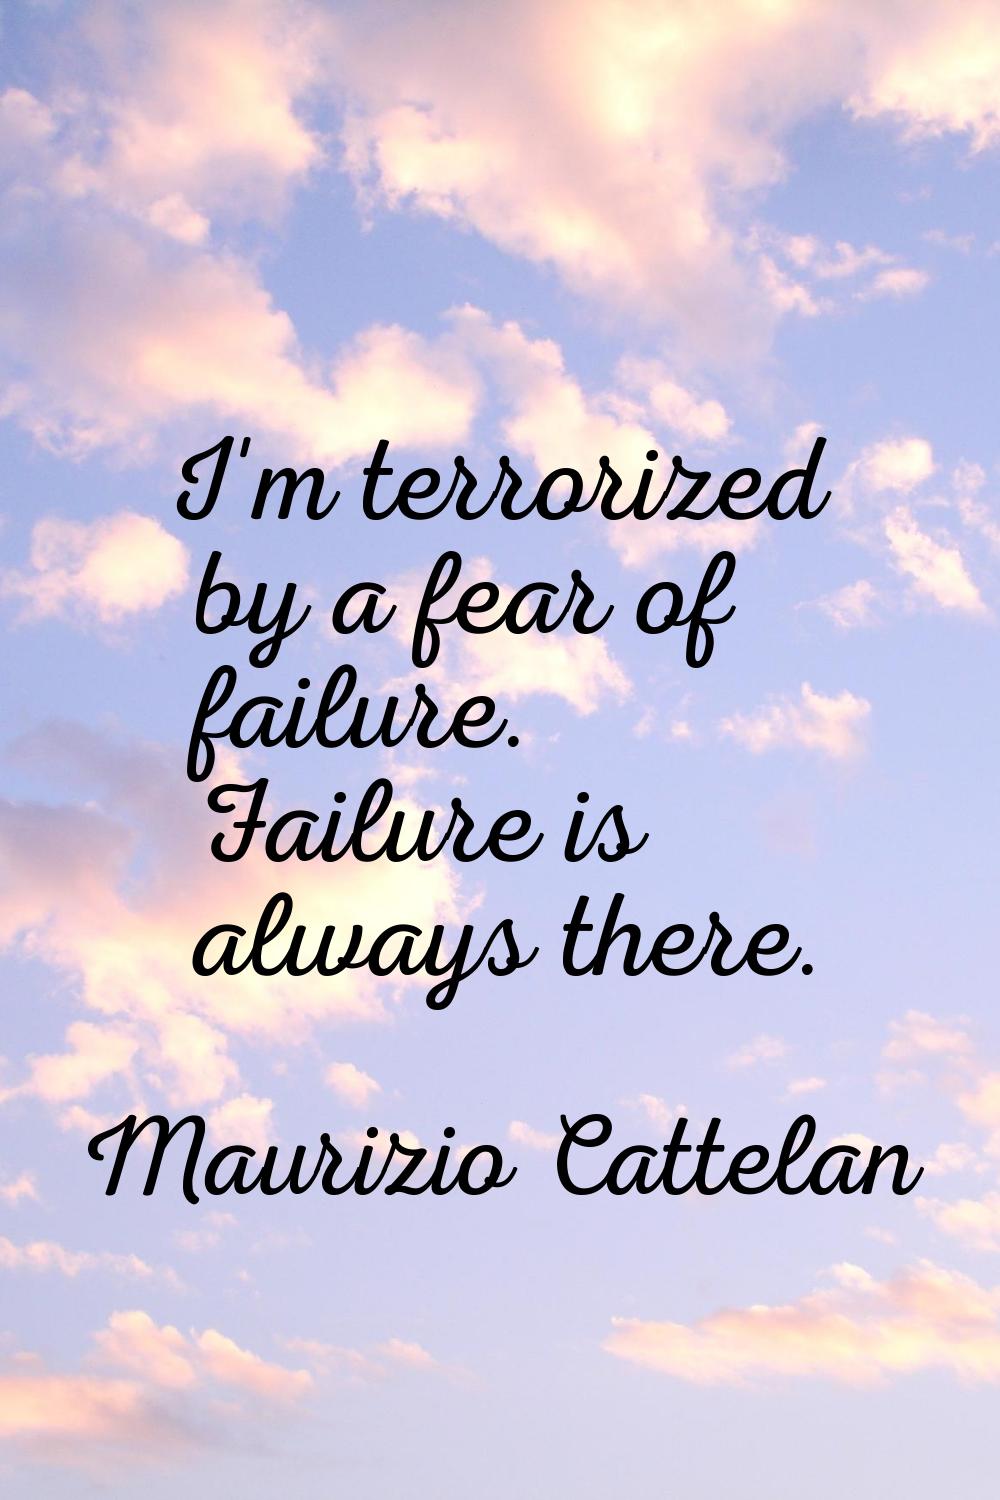 I'm terrorized by a fear of failure. Failure is always there.